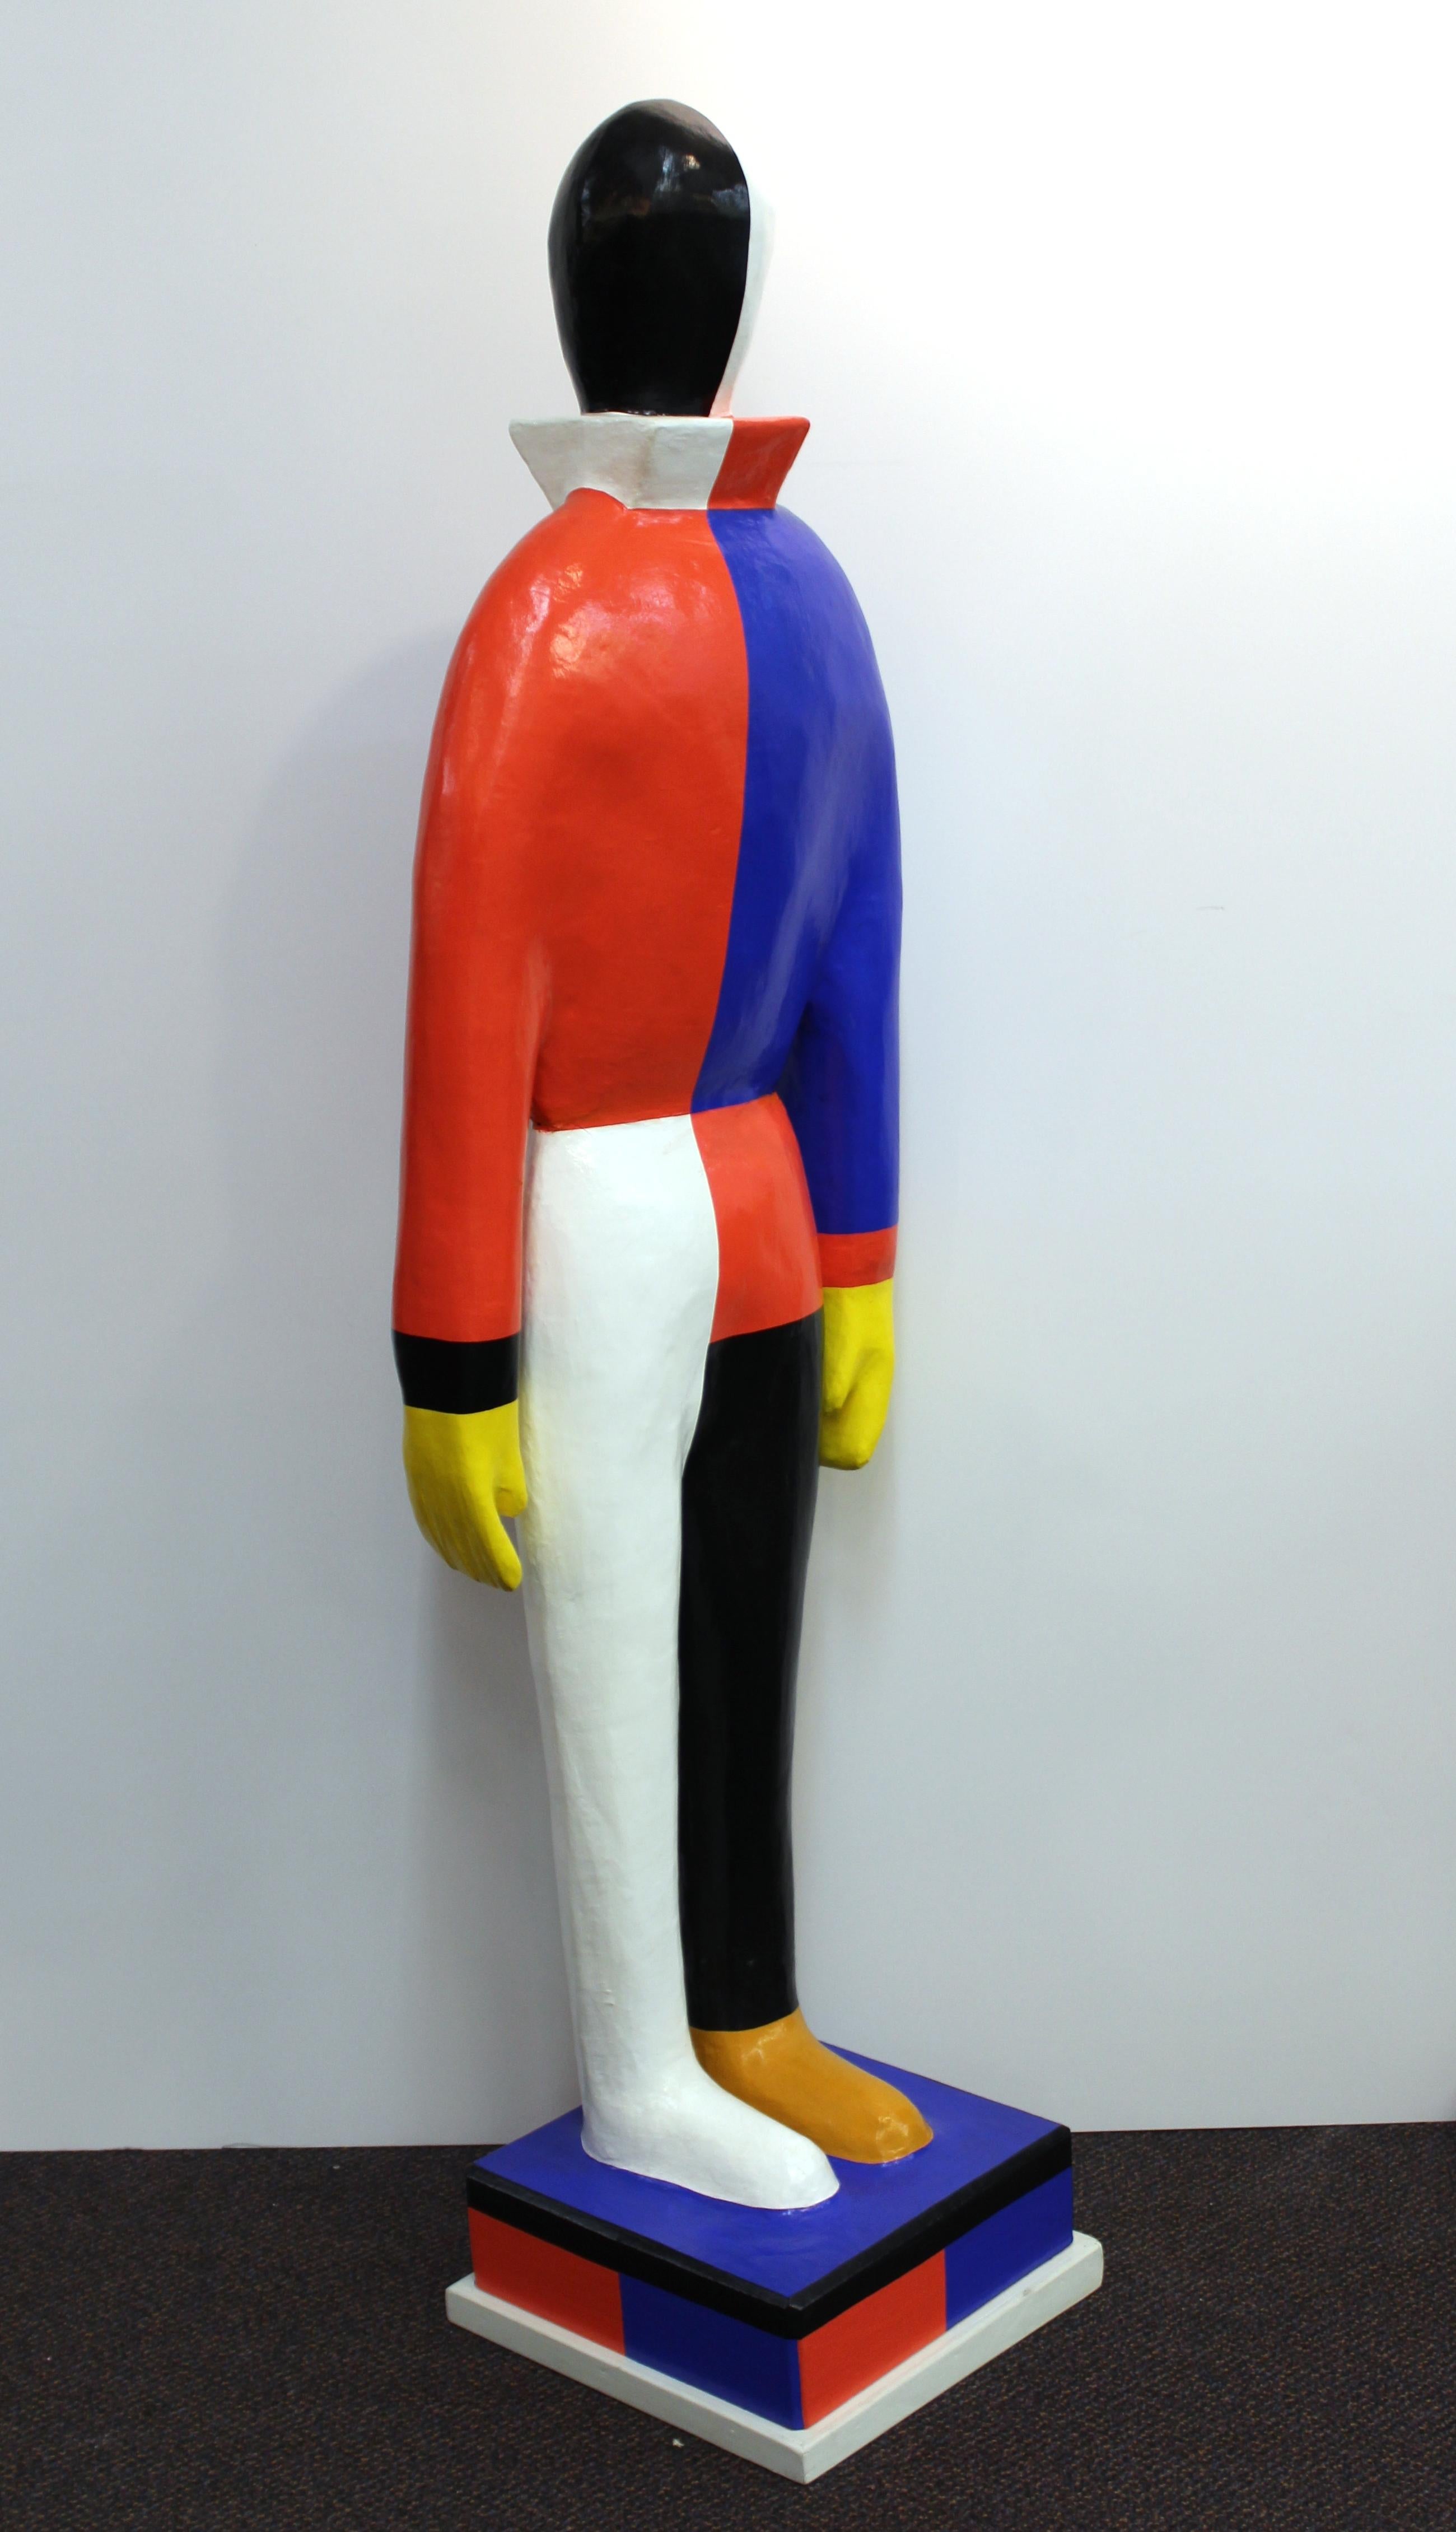 Modernist style statue inspired by the 1931 Suprematist 'Sportsmen' painting by Russian Modernist artist Kazimir Malevich, painted in a bold selection of colors. The statue was made during the 1990s and is in great condition with a small hairline